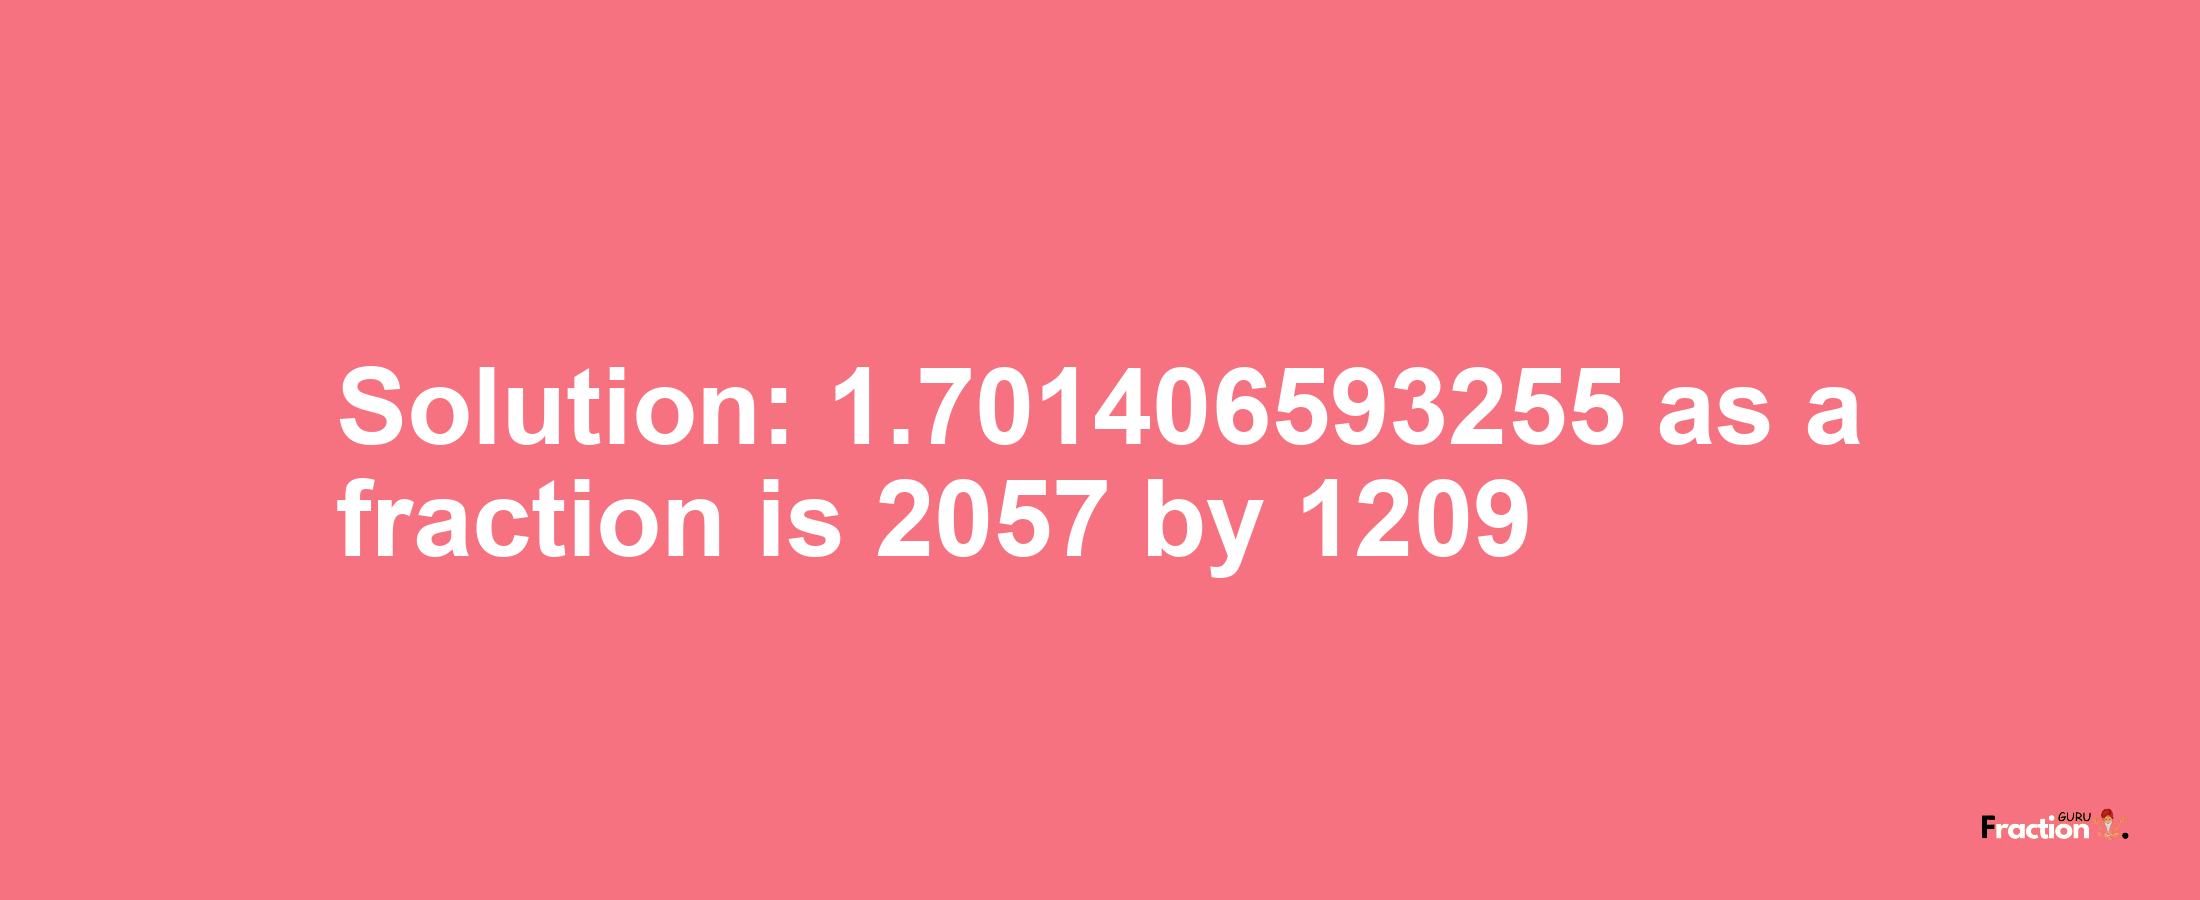 Solution:1.701406593255 as a fraction is 2057/1209